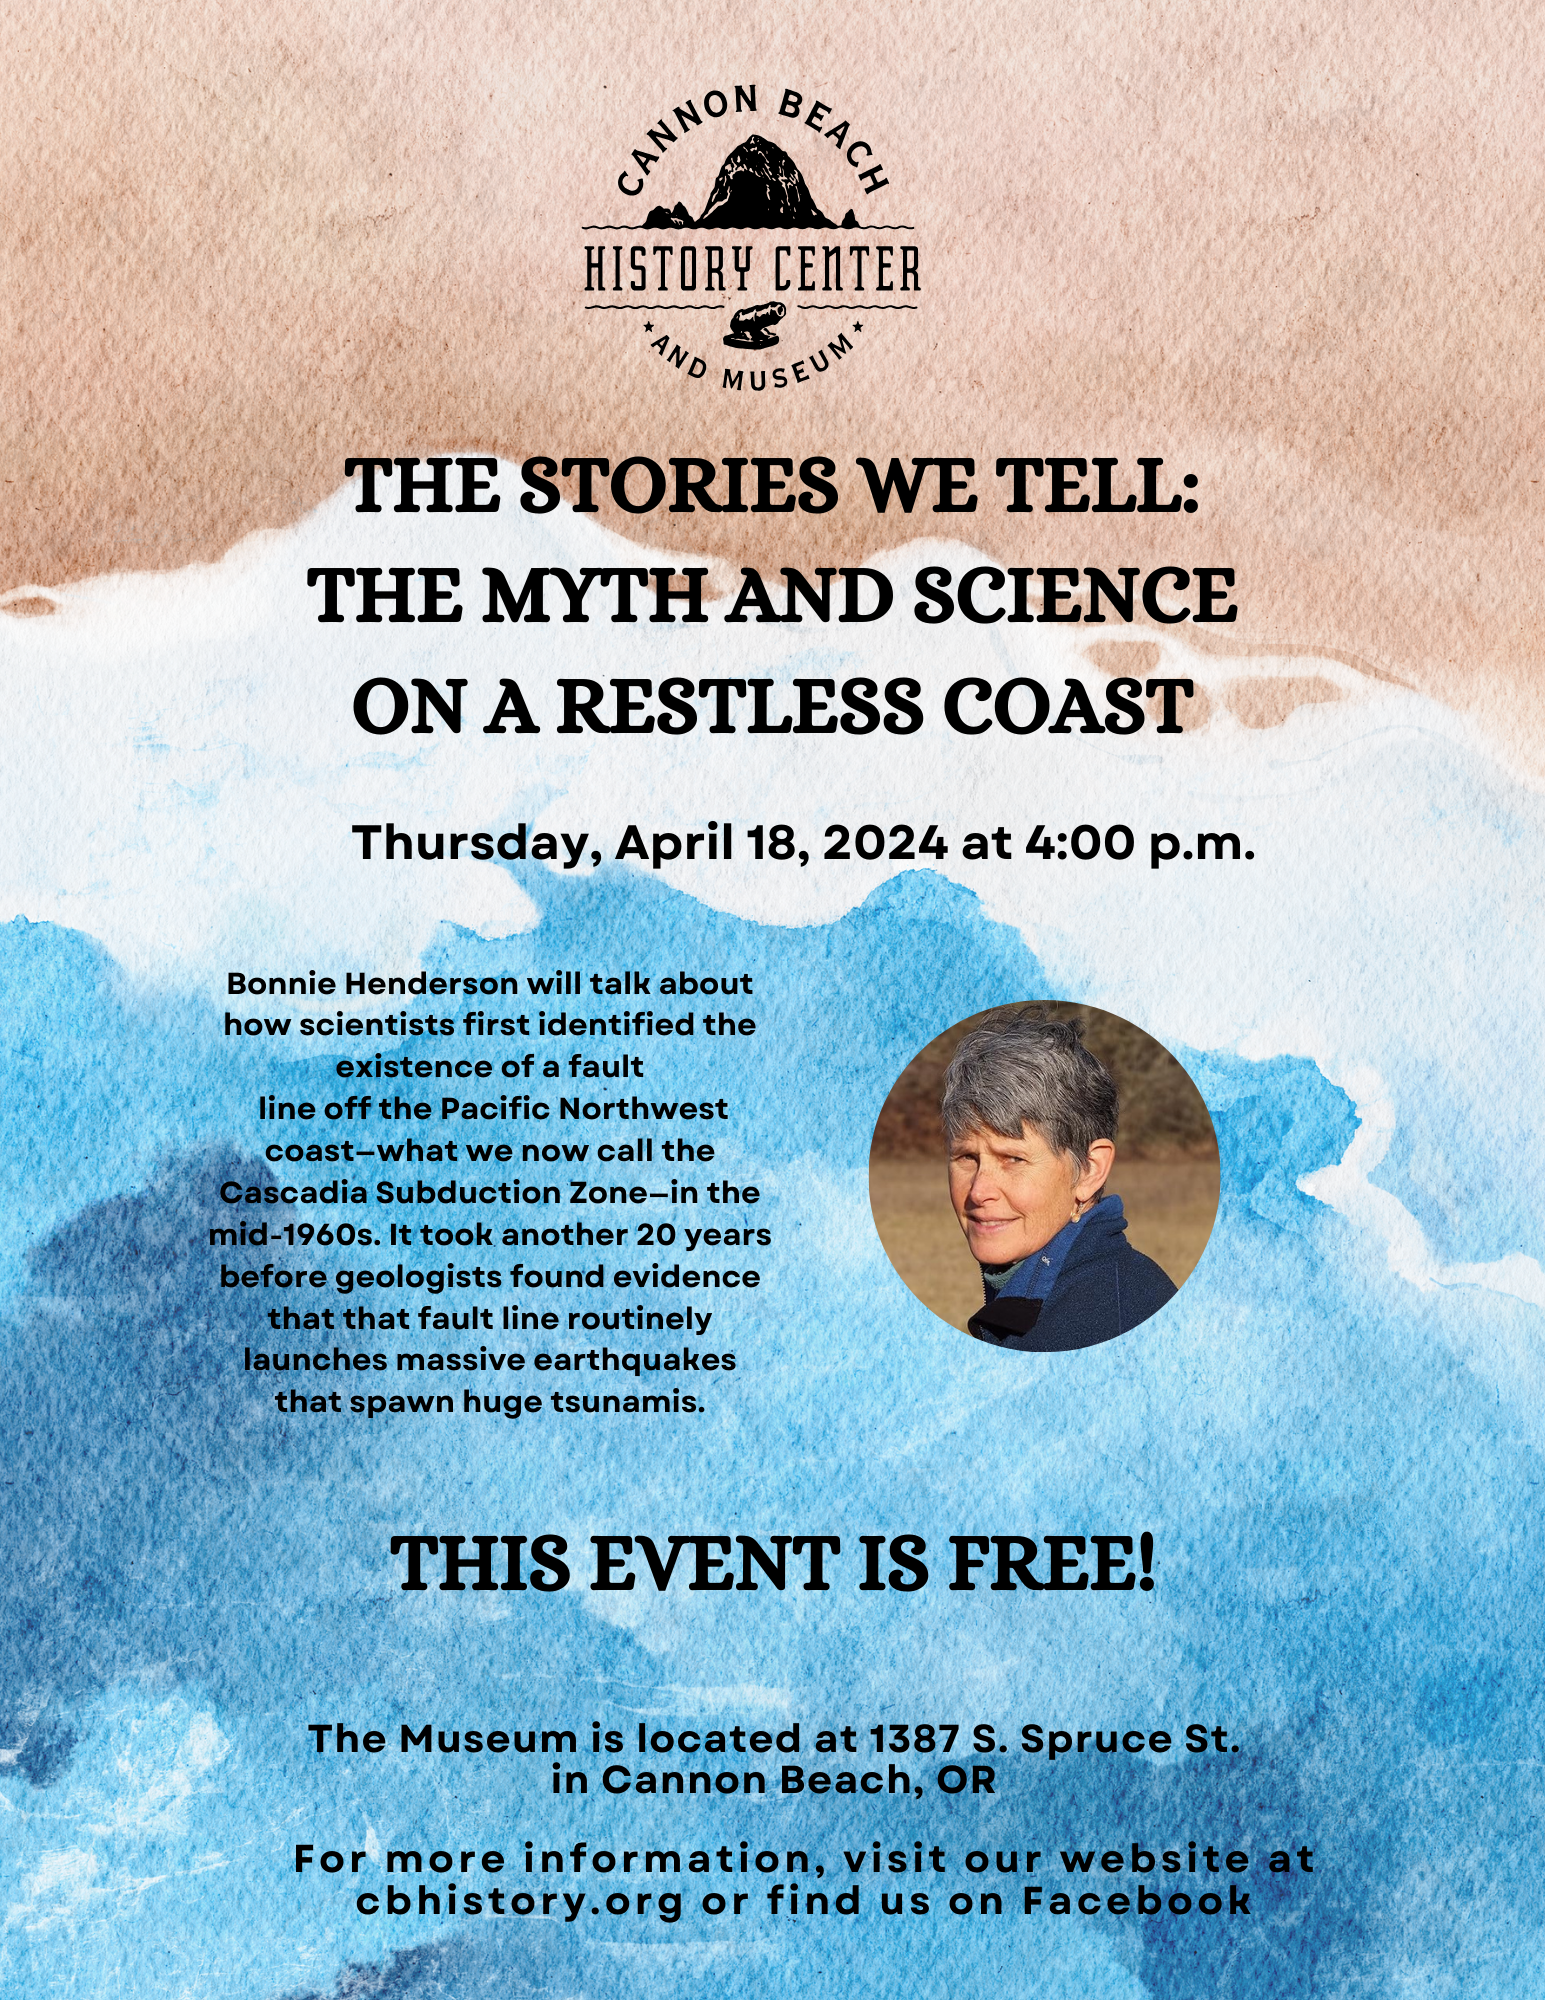 The Stories We Tell: The Myth and Science on a Restless Coast